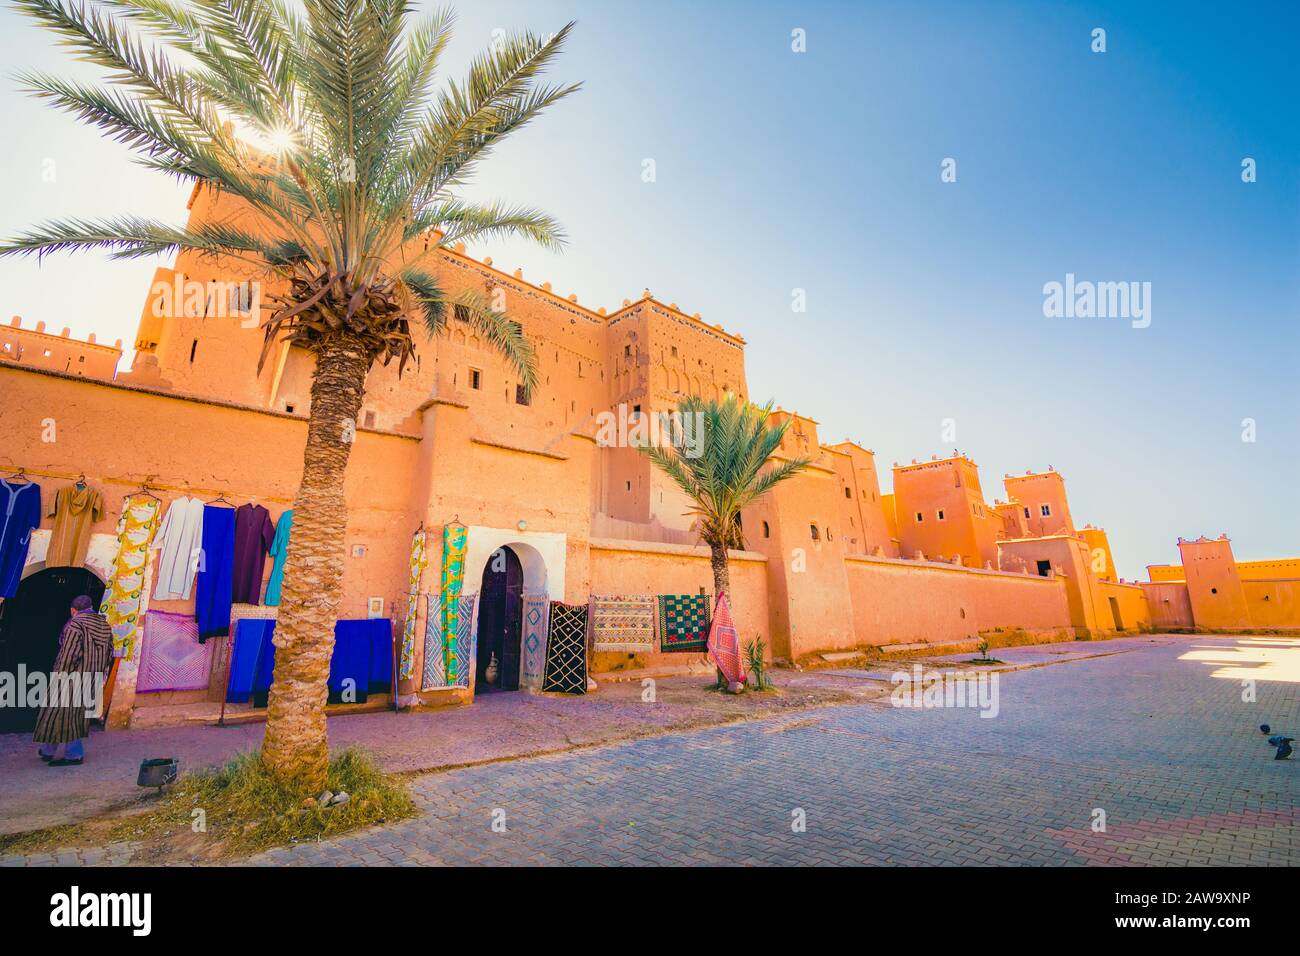 Taourirt Kasbah - Traditional Moroccan clay fortress in the city of Ouarzazate, Morocco. Stock Photo